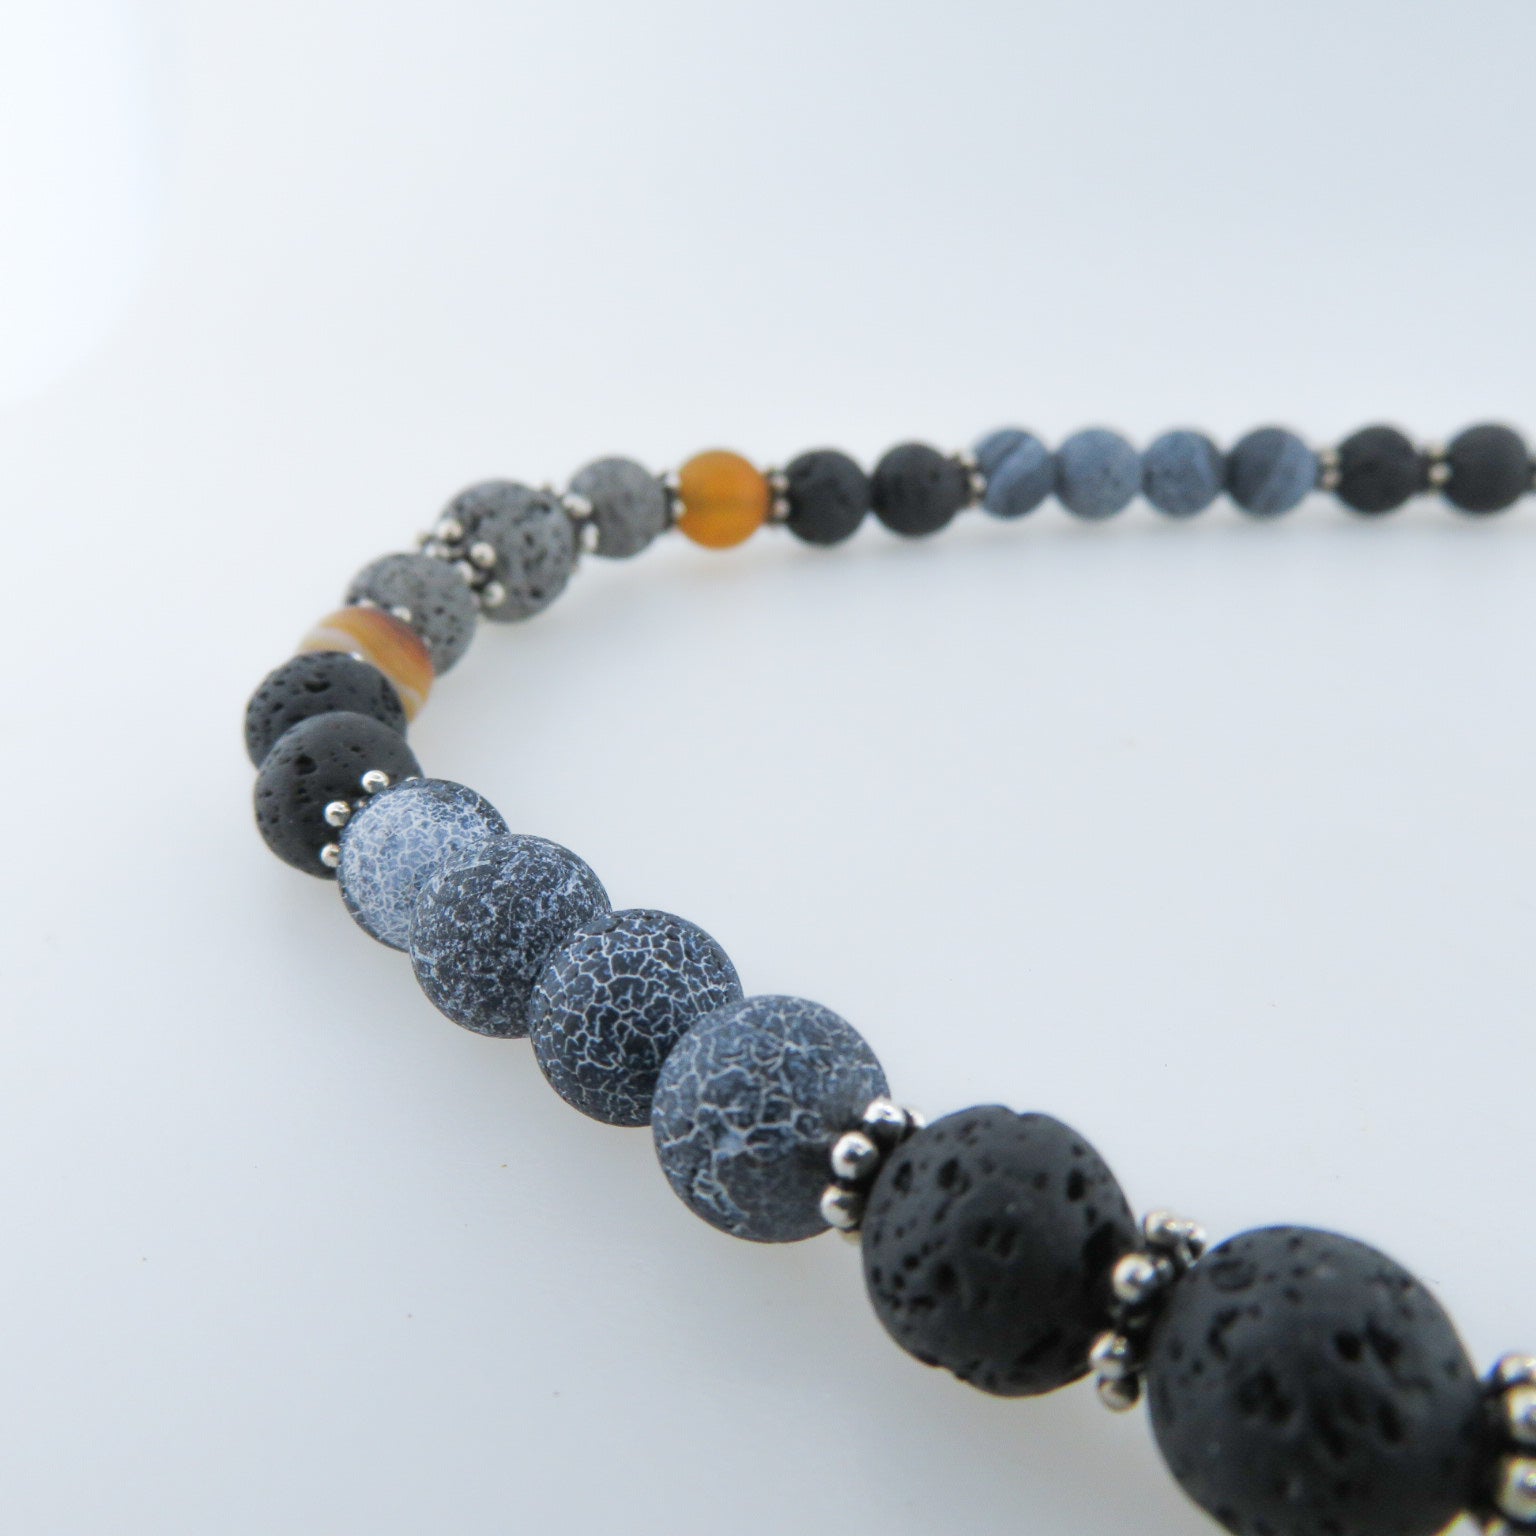 Agate Beads Necklace with Lava and Silver Beads